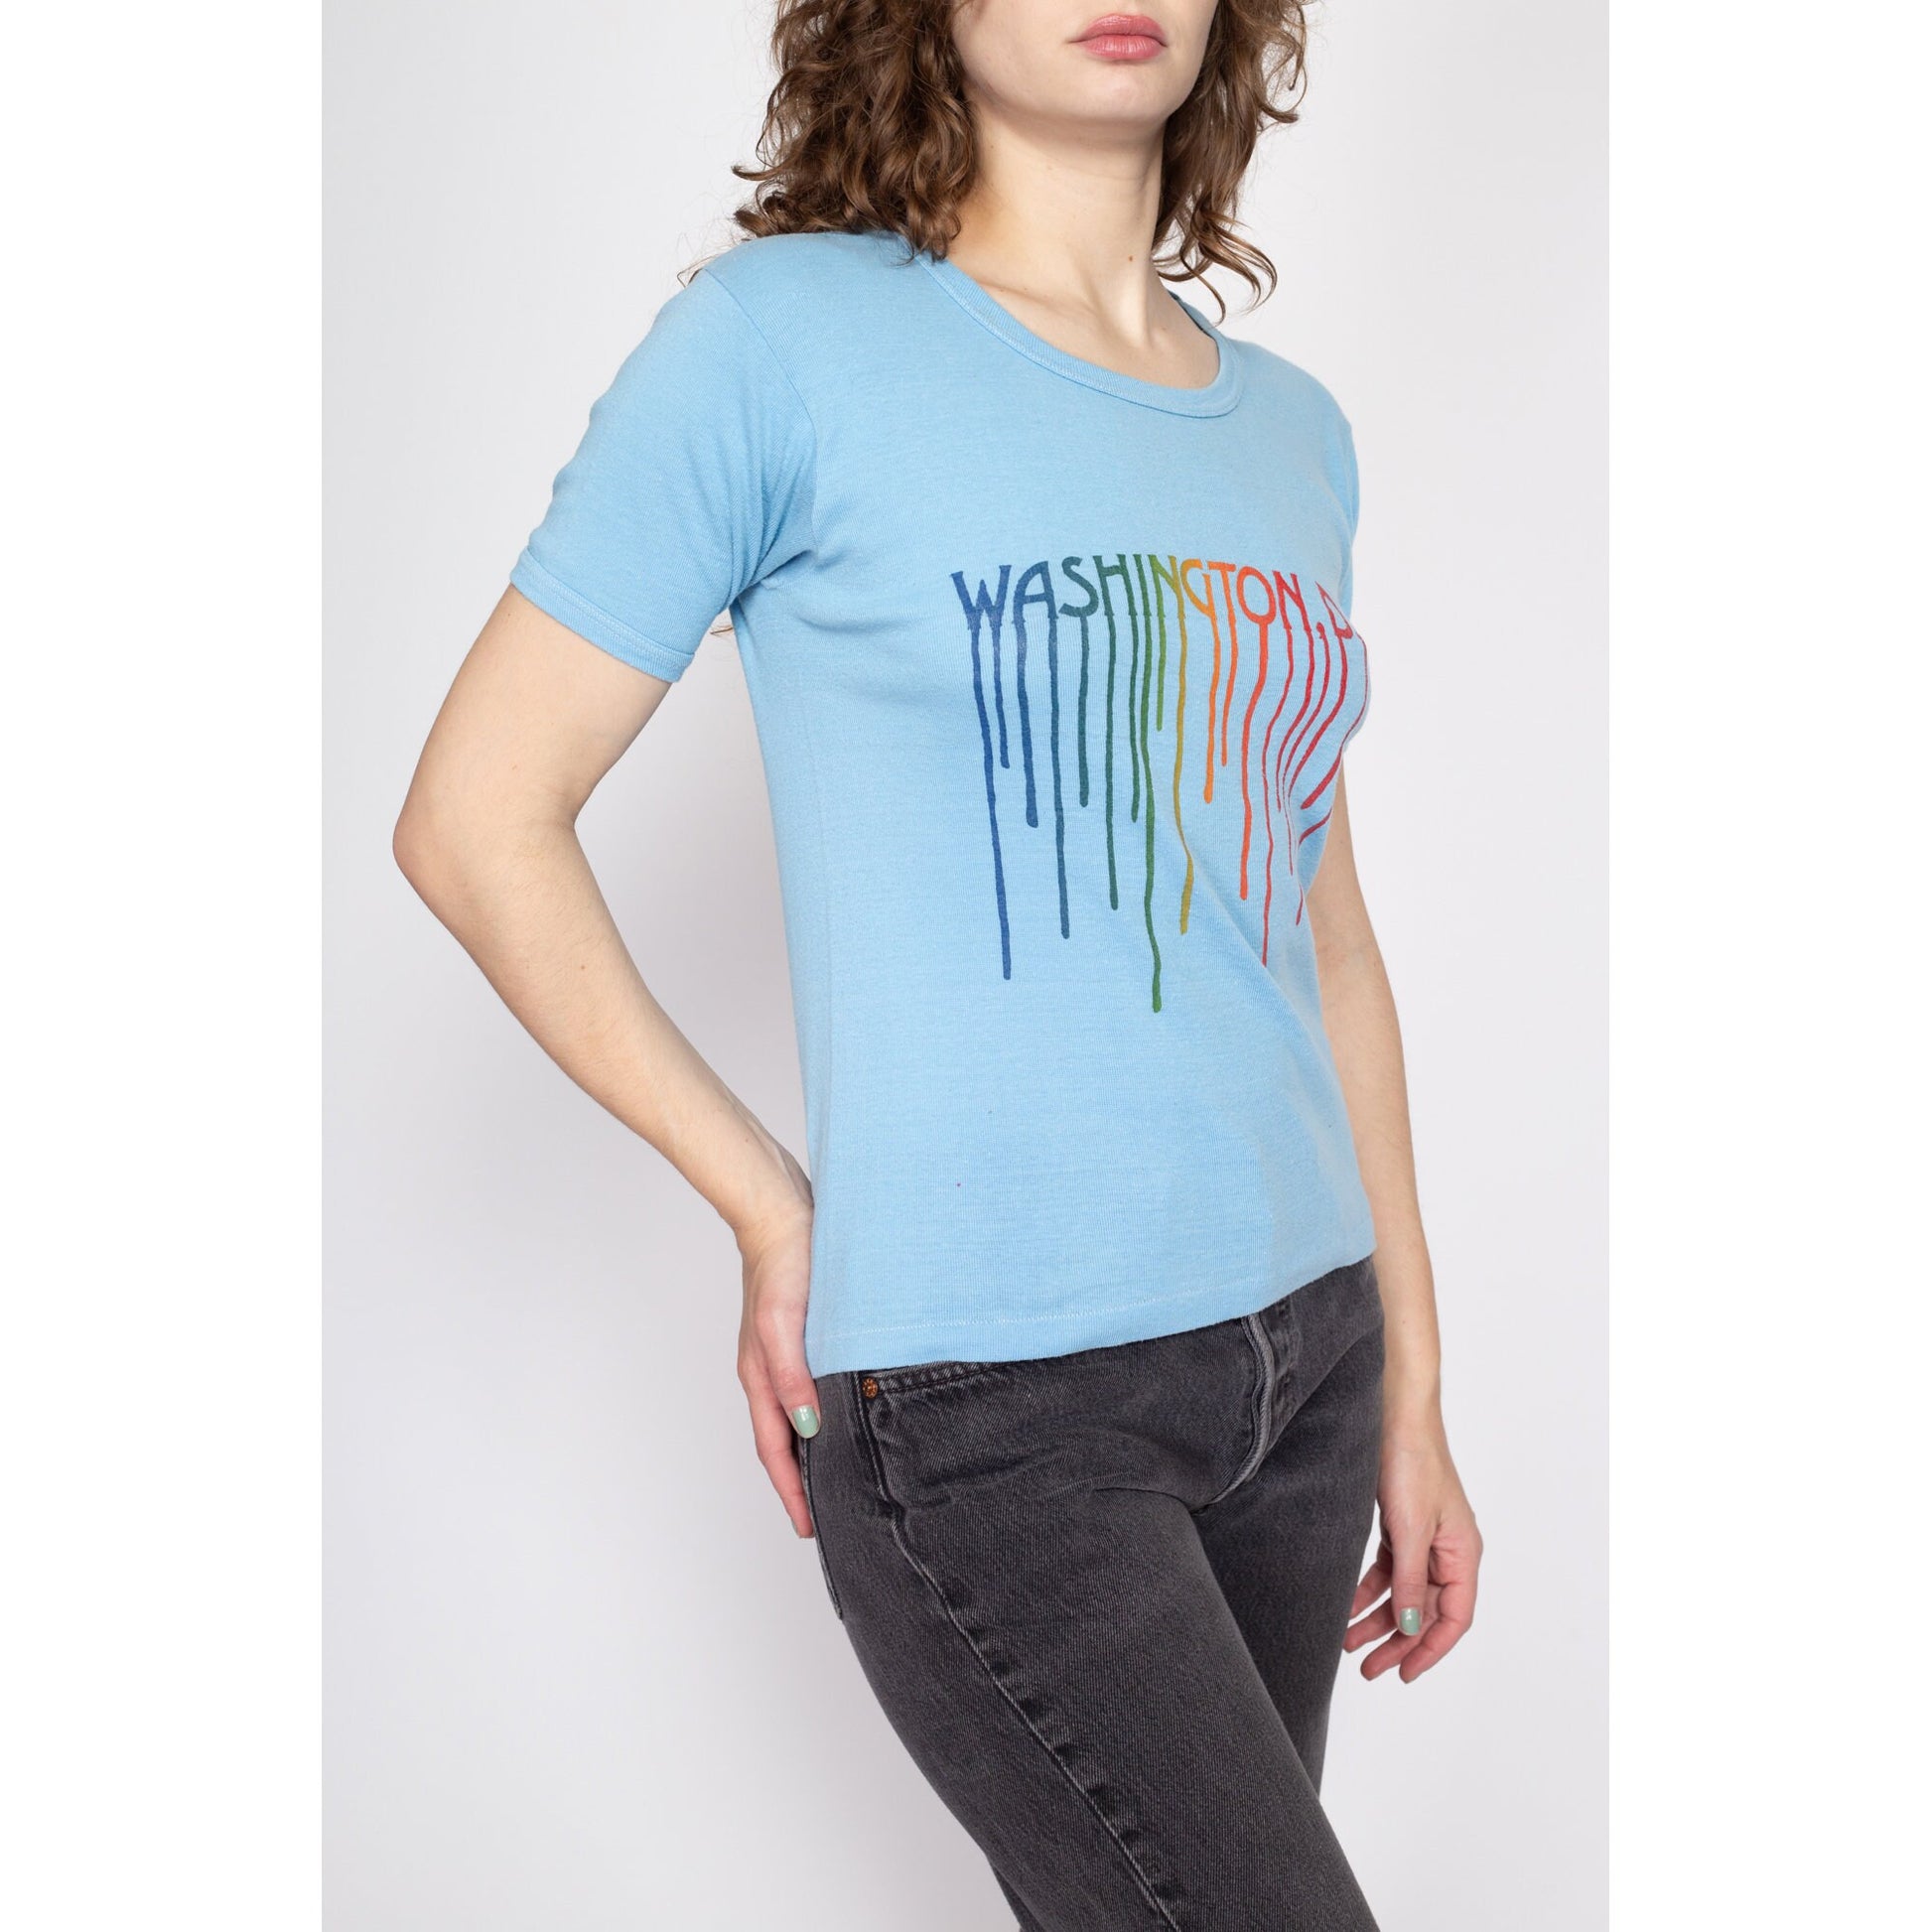 Med-Lrg 70s Washington DC Rainbow Paint Drip Graphic Tee | Vintage Blue Novelty Print Fitted T Shirt